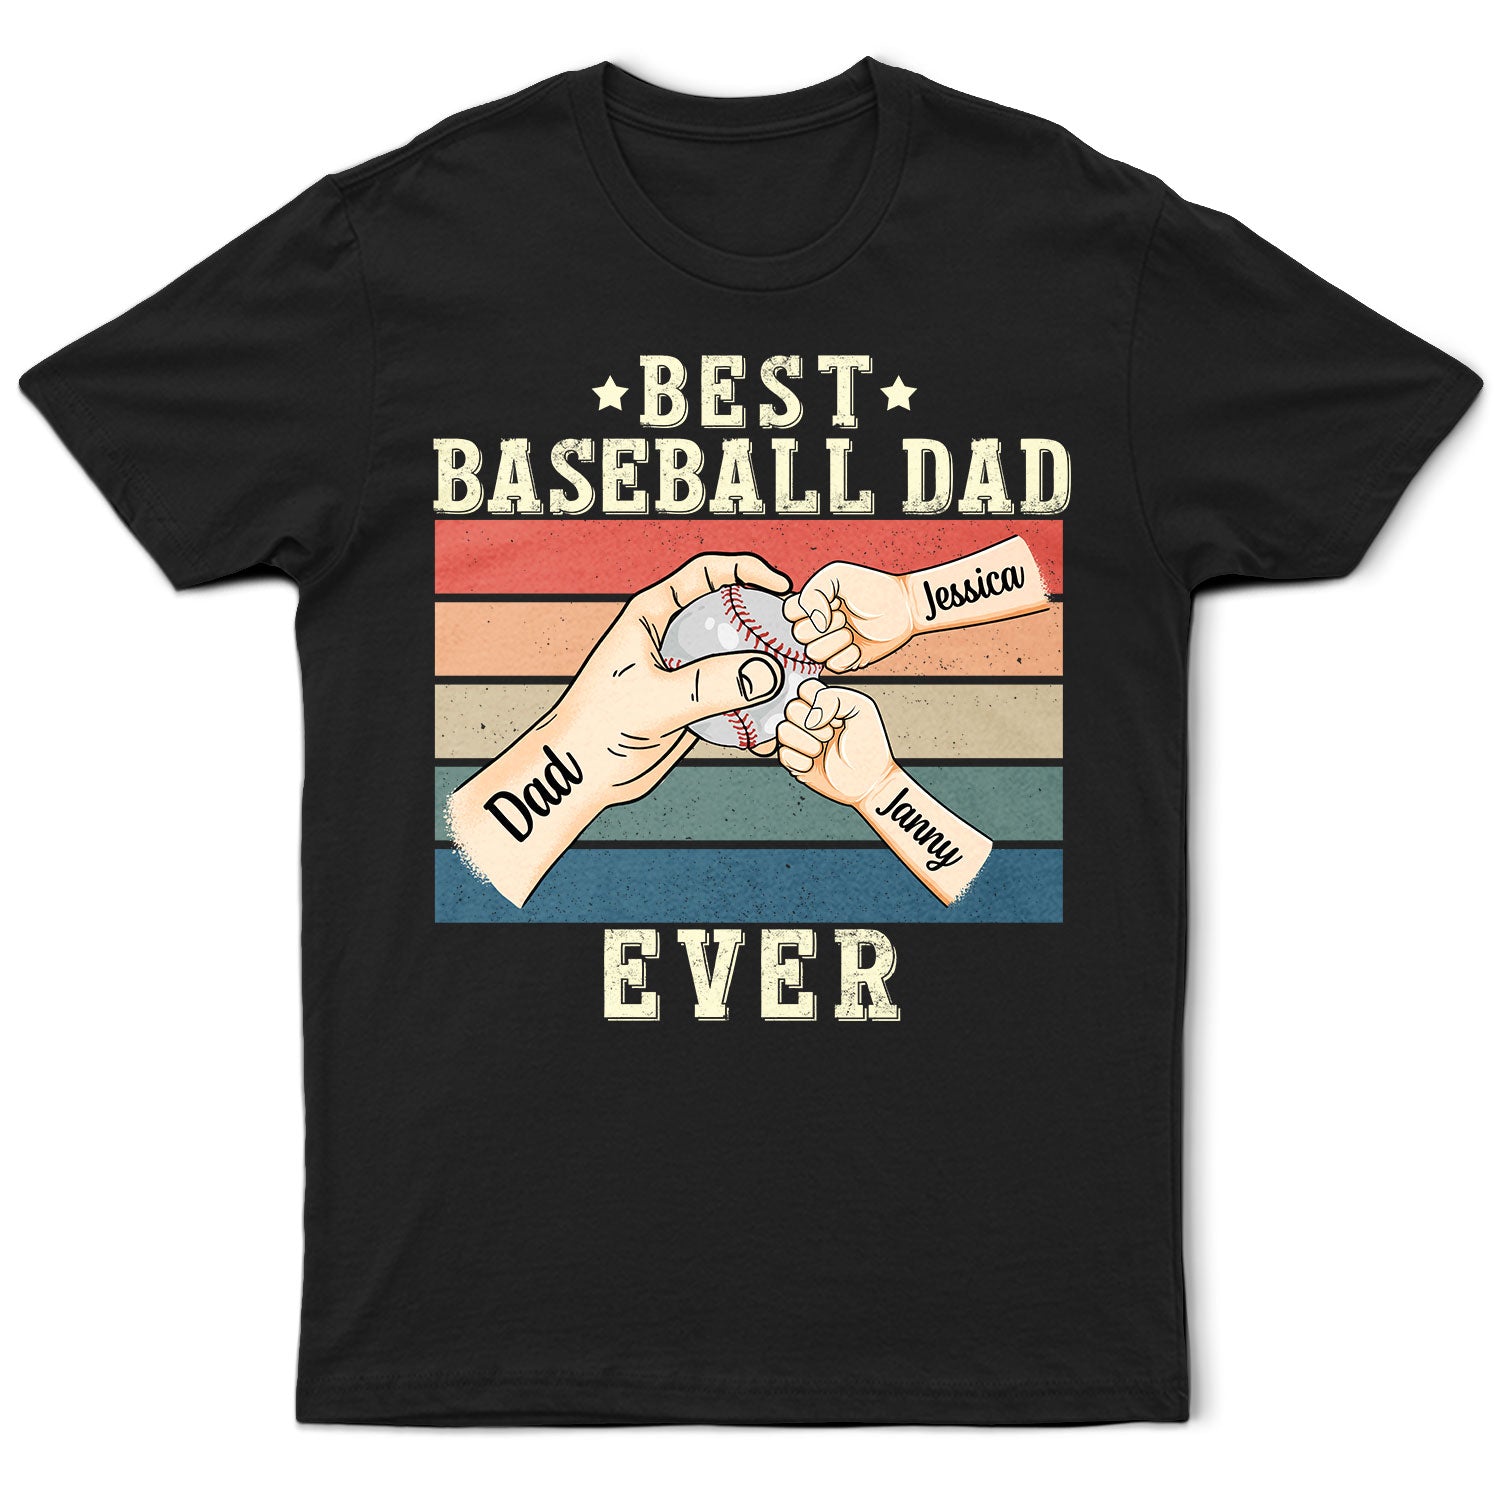 Best Baseball Softball Dad - Gift For Father, Sport Fans - Personalized T Shirt